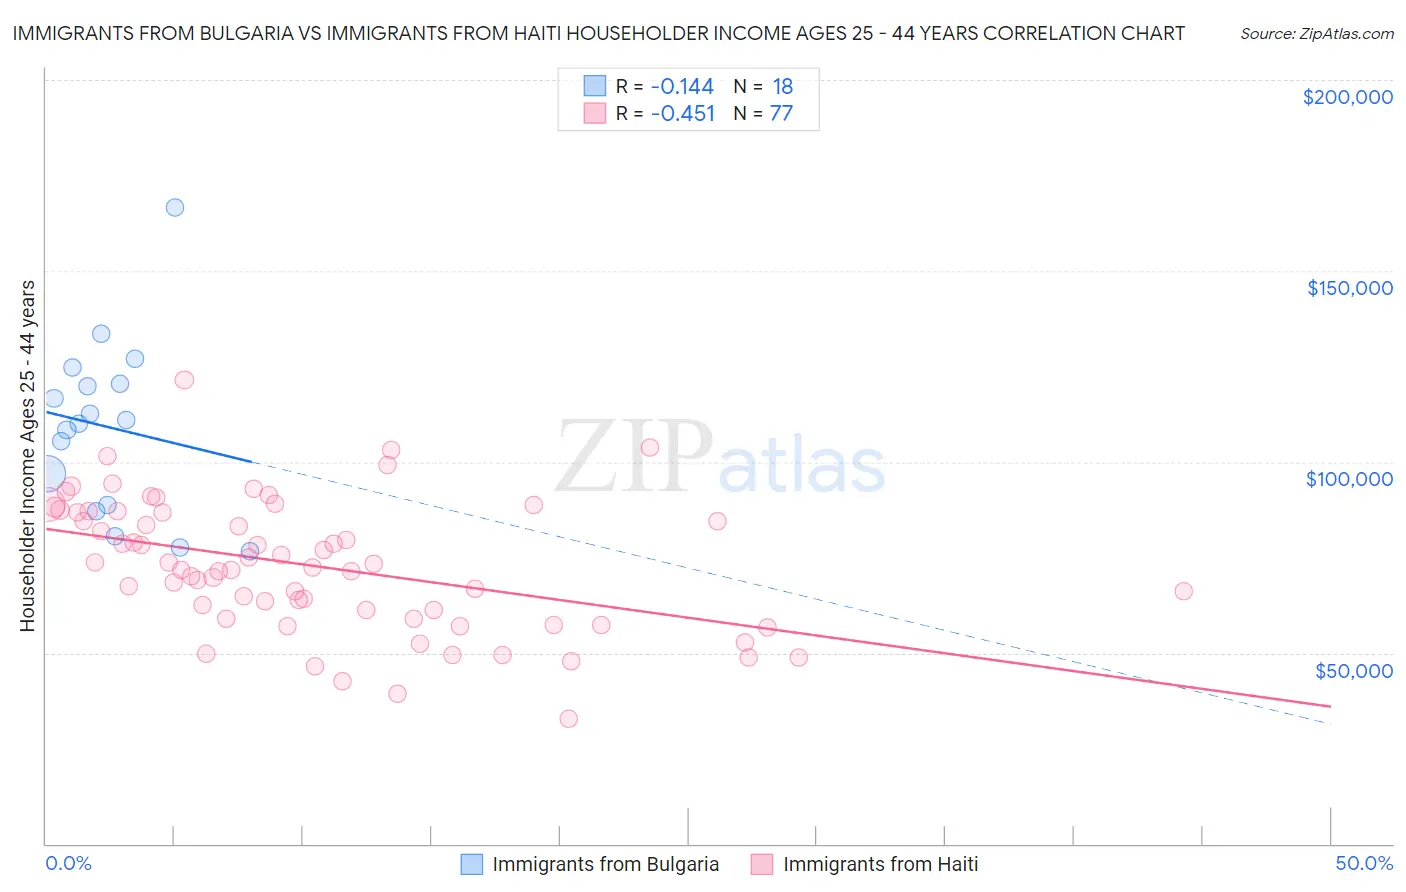 Immigrants from Bulgaria vs Immigrants from Haiti Householder Income Ages 25 - 44 years